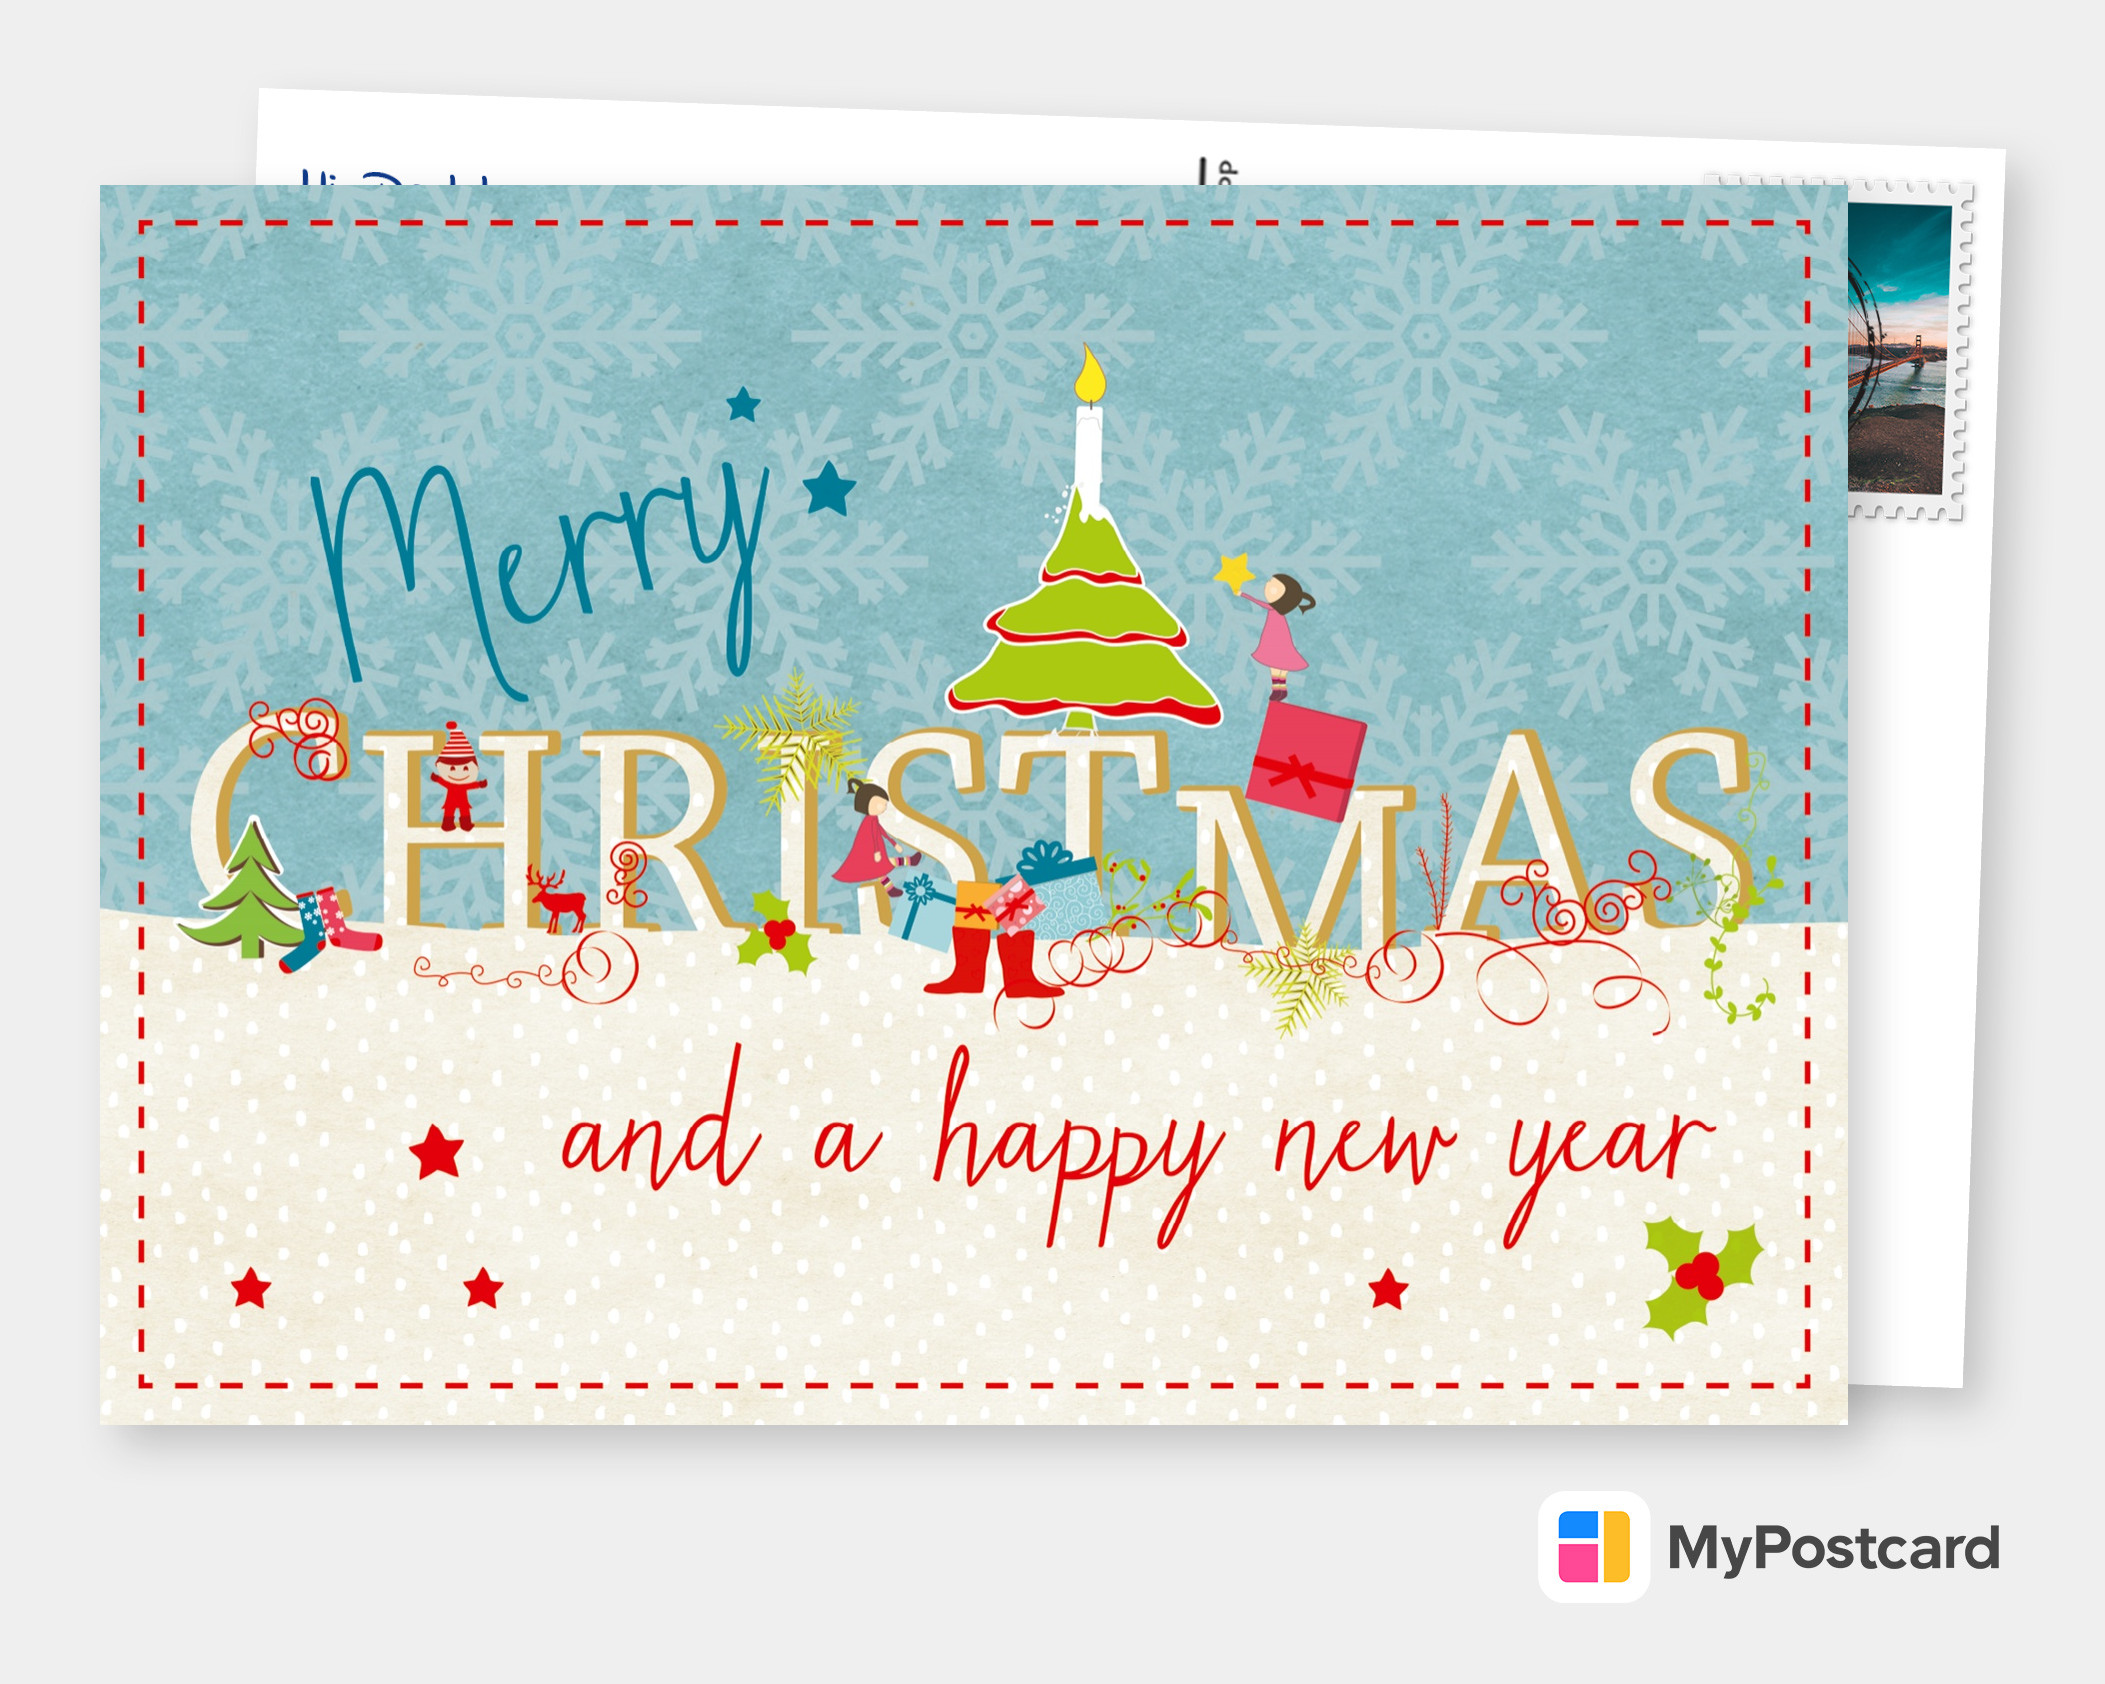 Your Own Christmas Cards  Printed & Mailed For You  Send Online  Postcards, Greeting Cards  Photo Postcard App  Christmas Cards Throughout Print Your Own Christmas Cards Templates